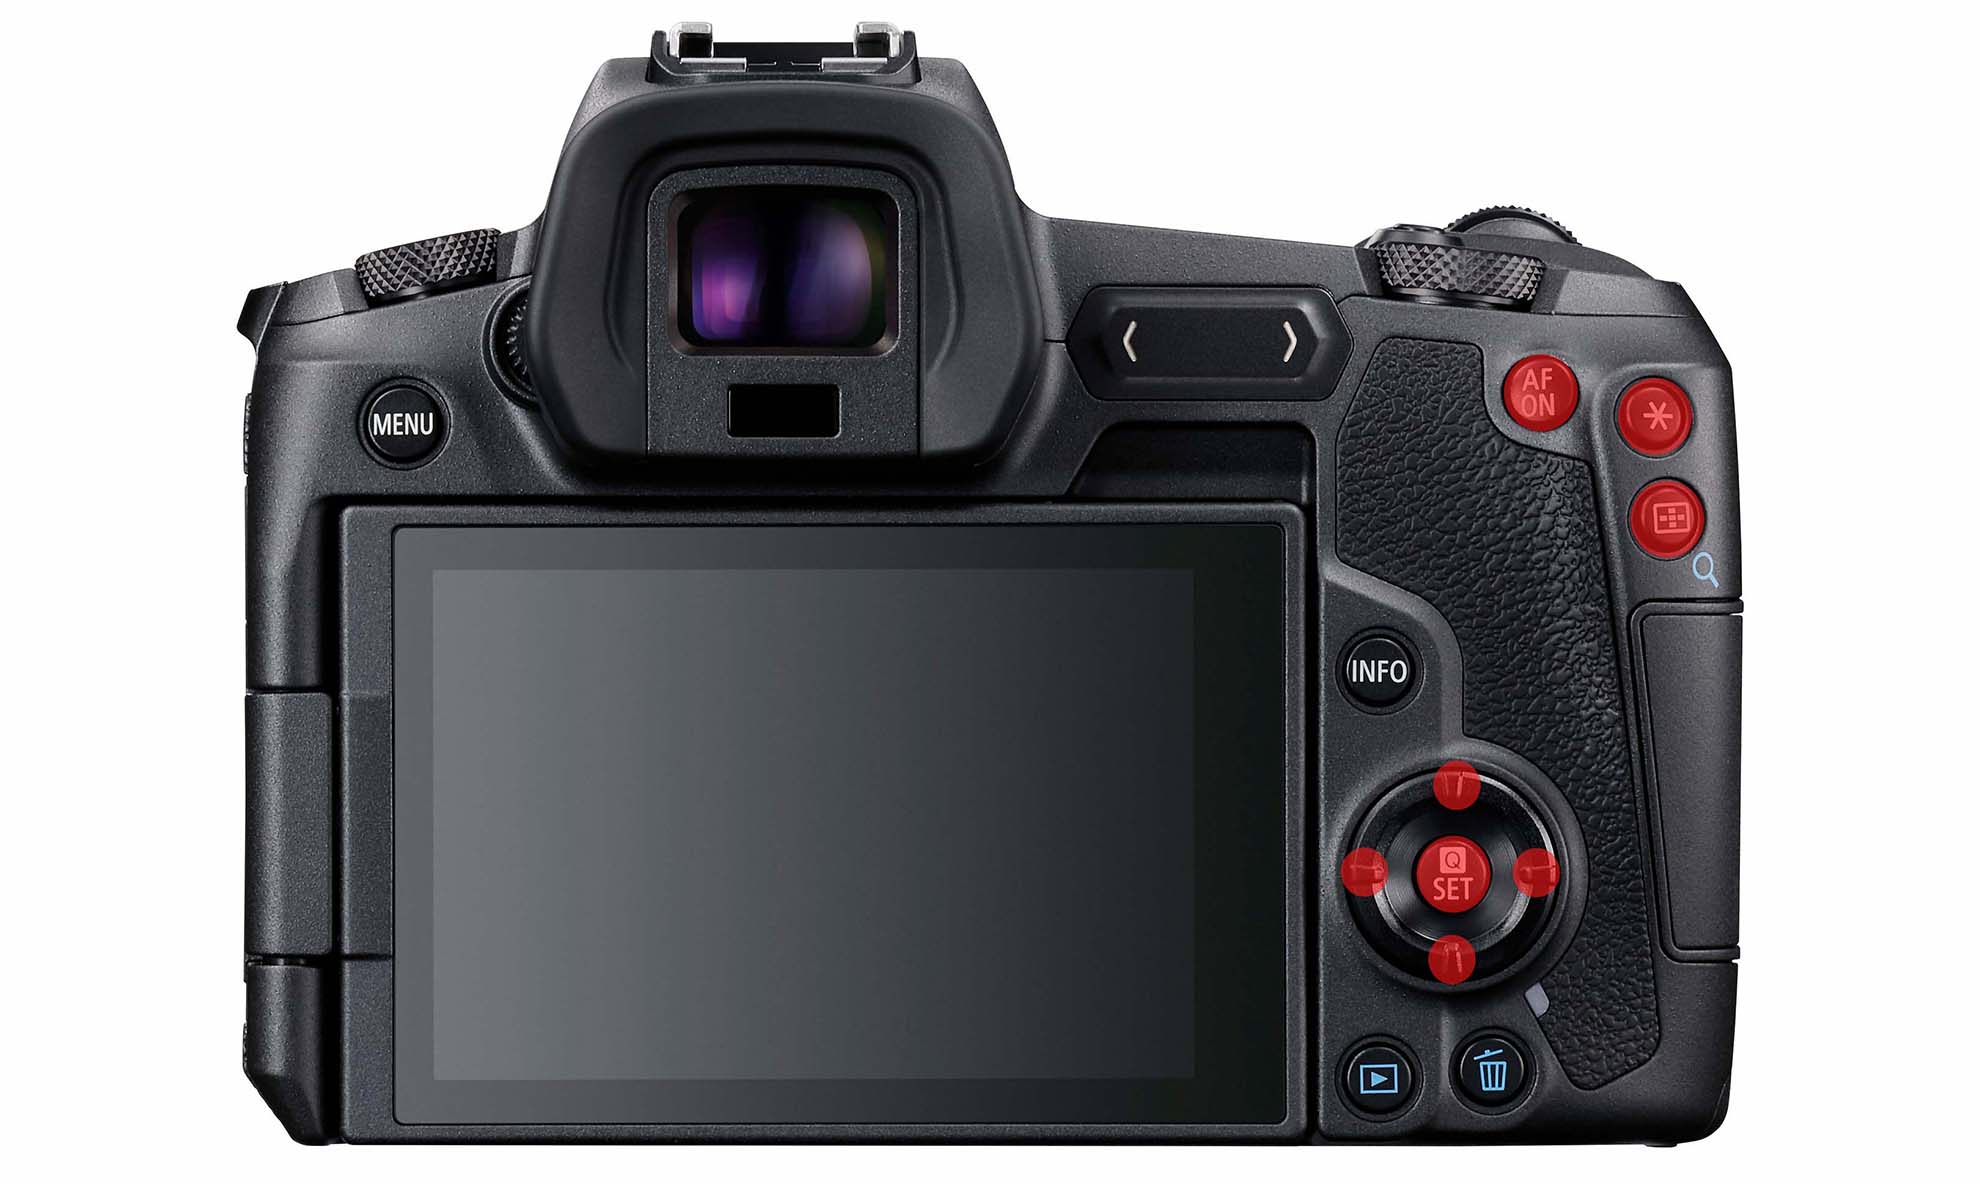 photo of the back of the EOS R camera highlighting buttons on the back